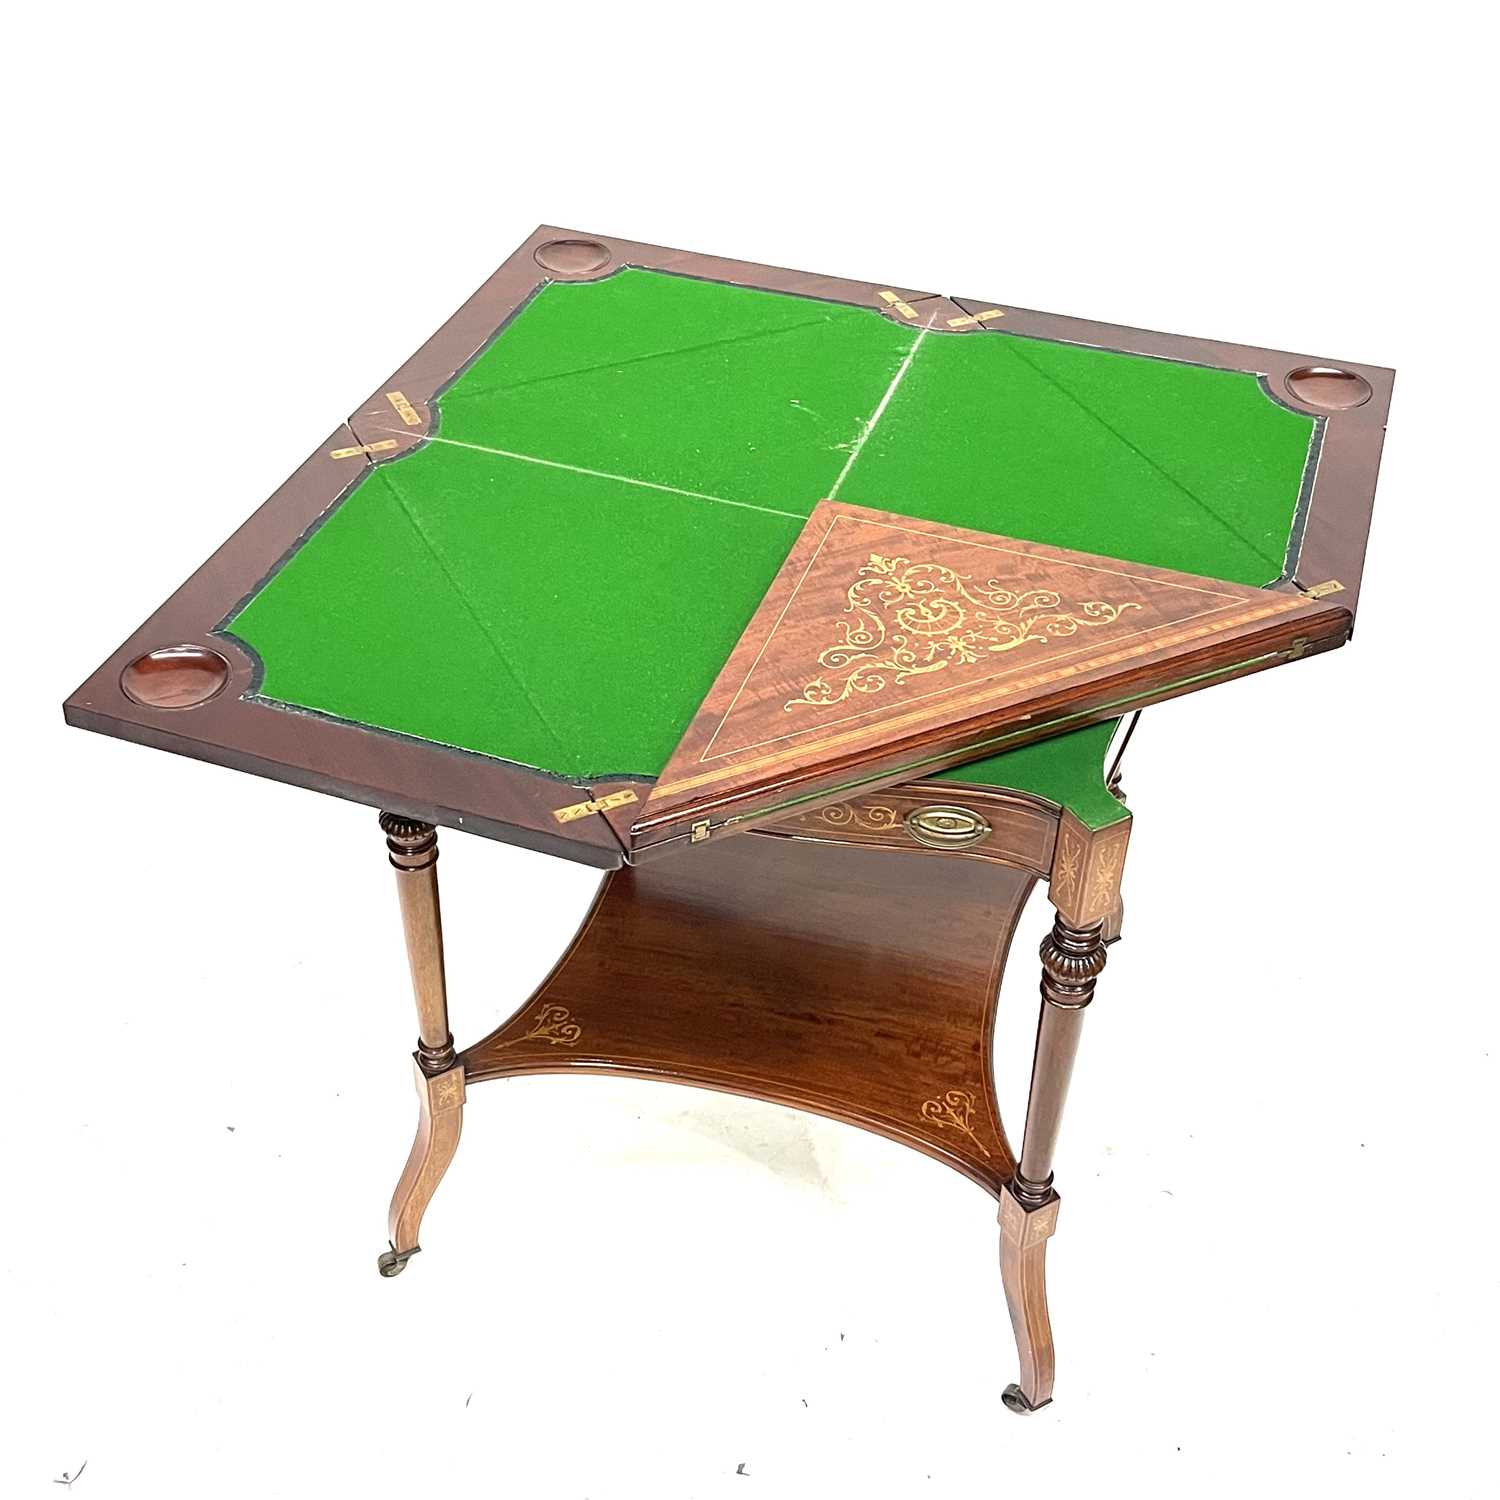 An Edwardian mahogany envelope-action games table, circa 1910, marquetry inlaid, satinwood - Image 3 of 4